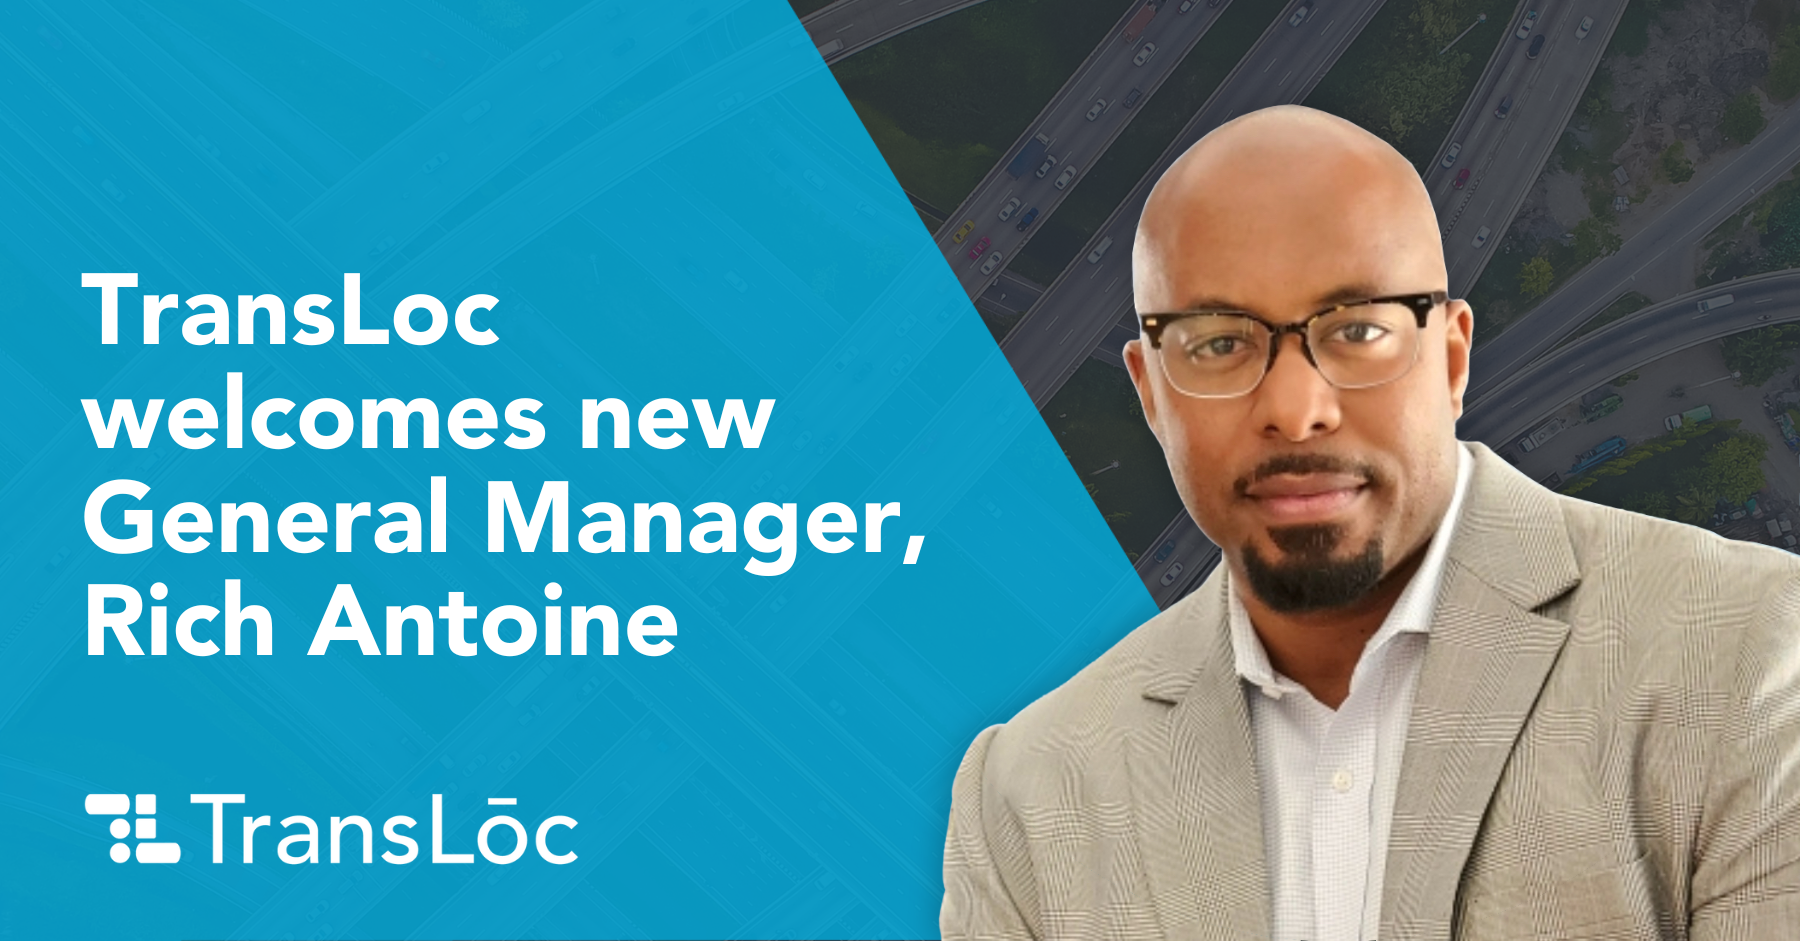 TransLoc welcomes new General Manager Rich Antoine